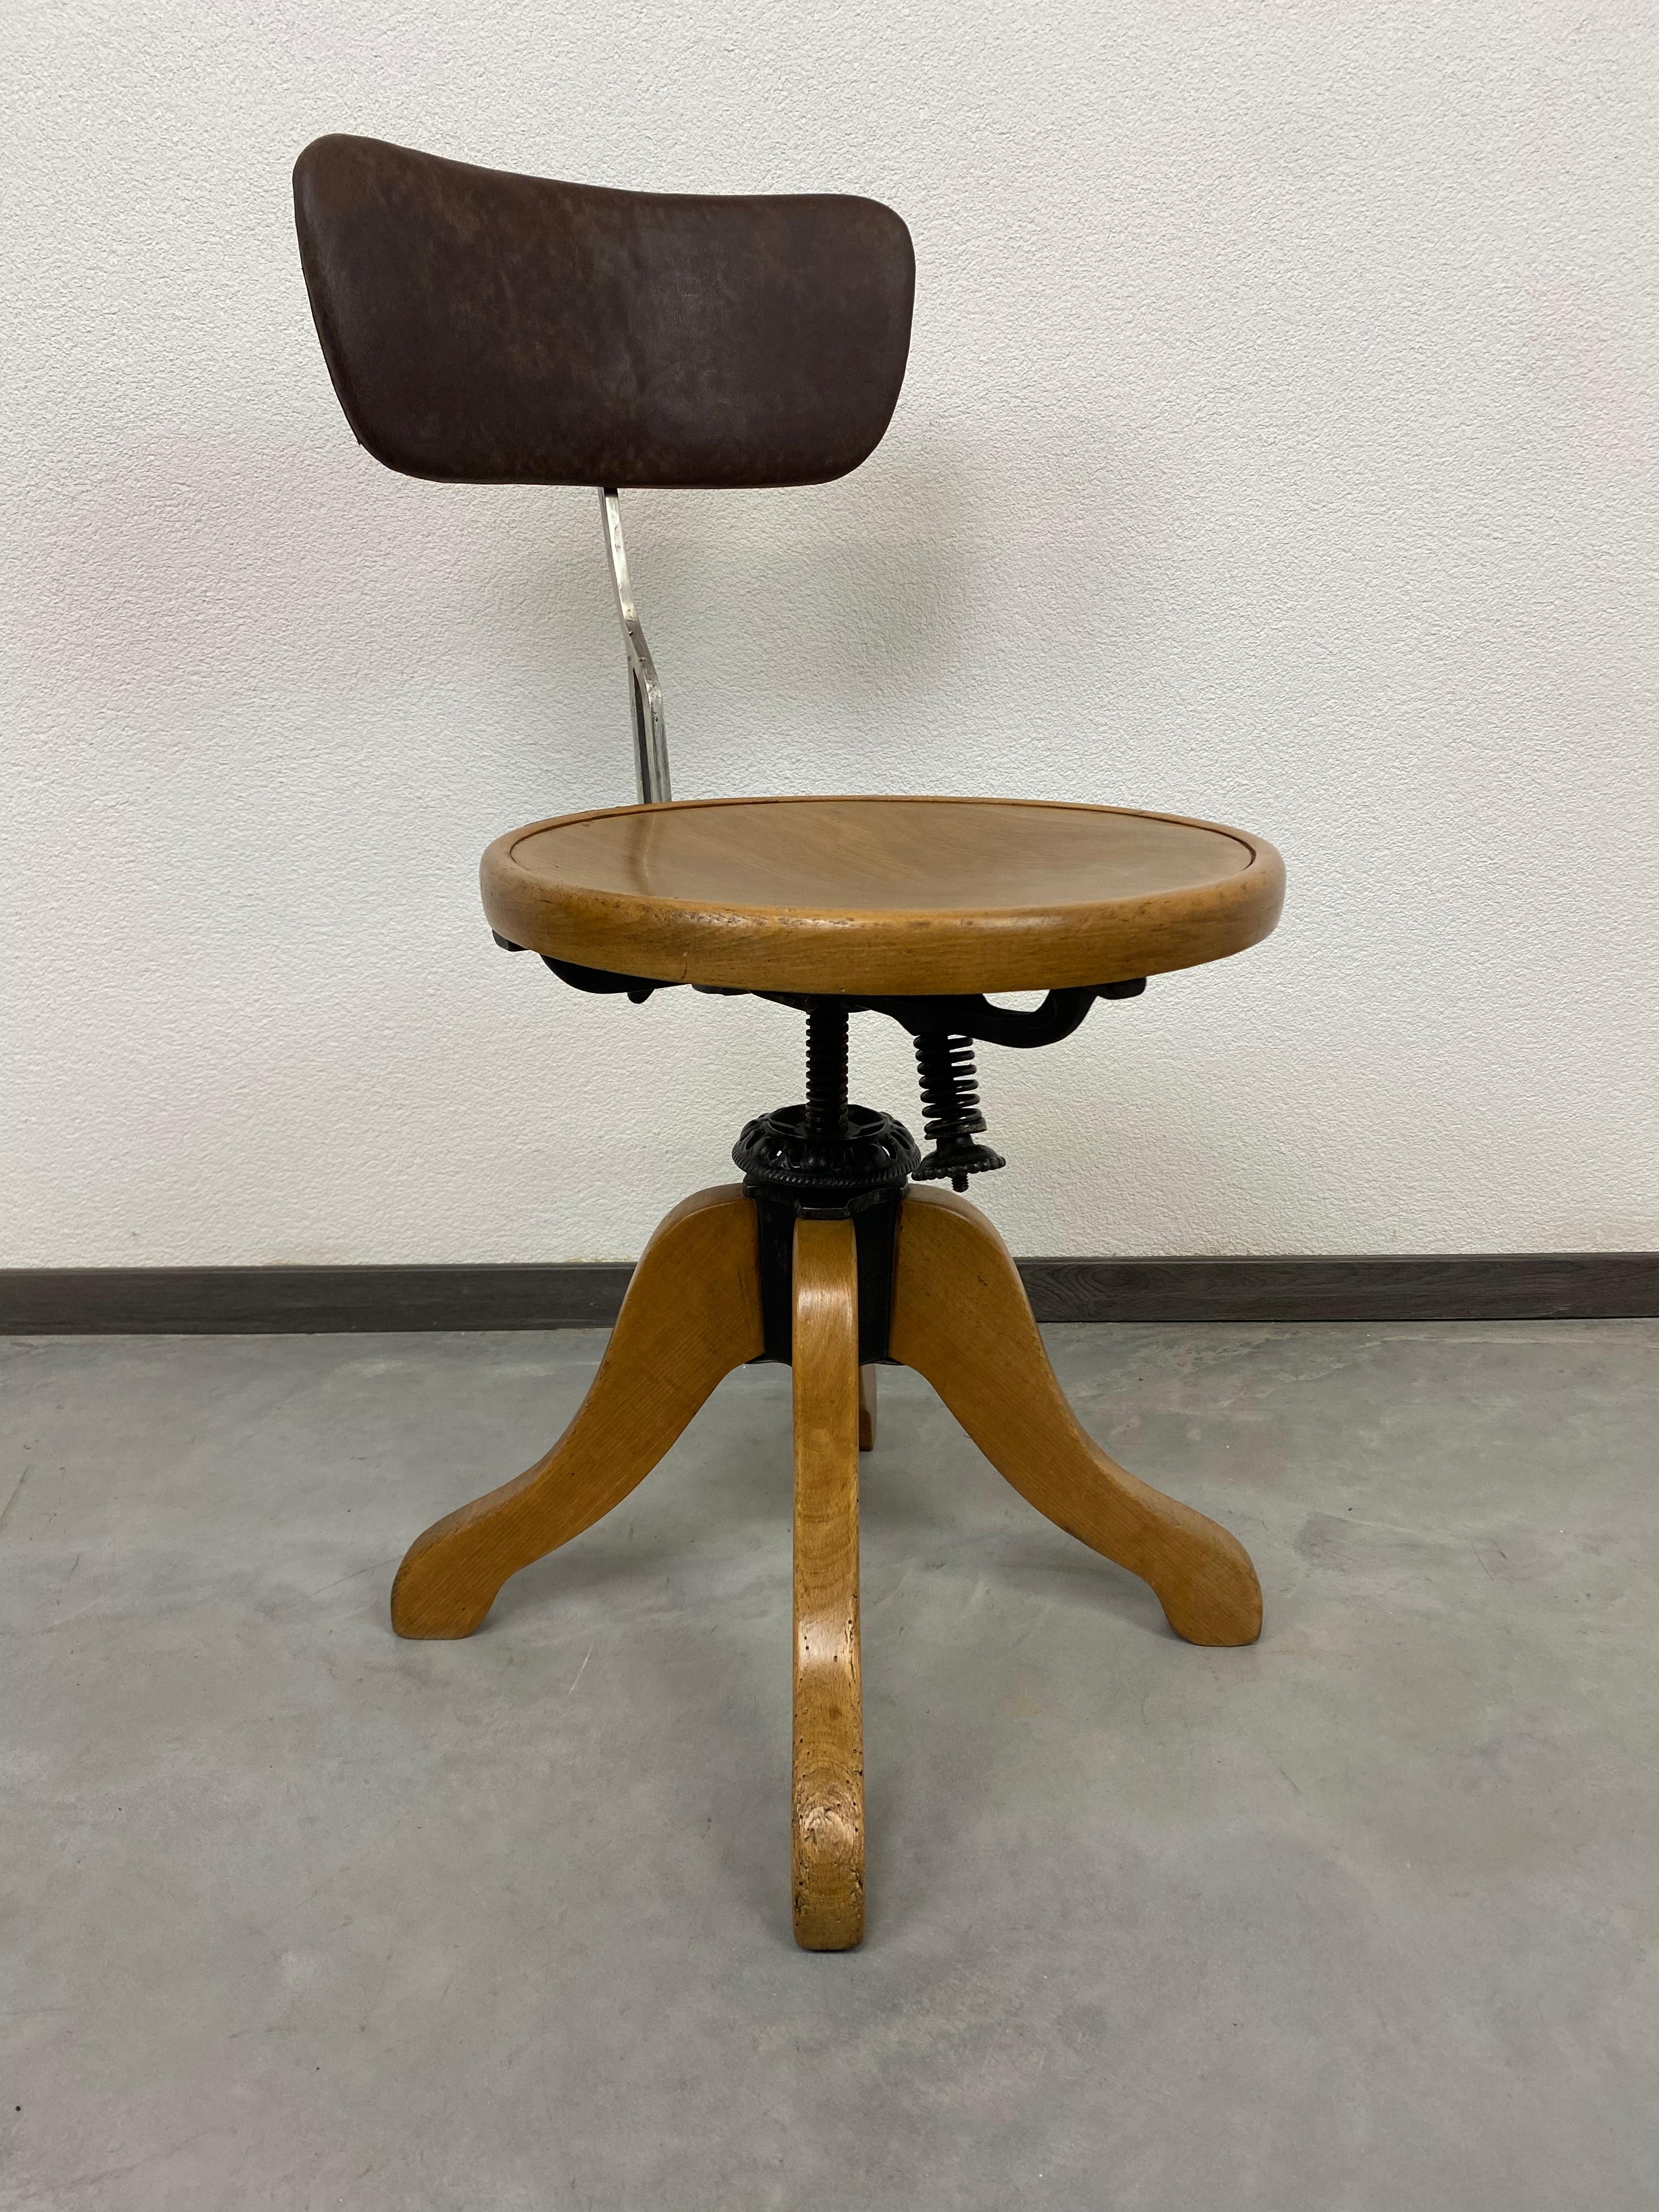 Swivel desk chair by Thonet in very good original condition.